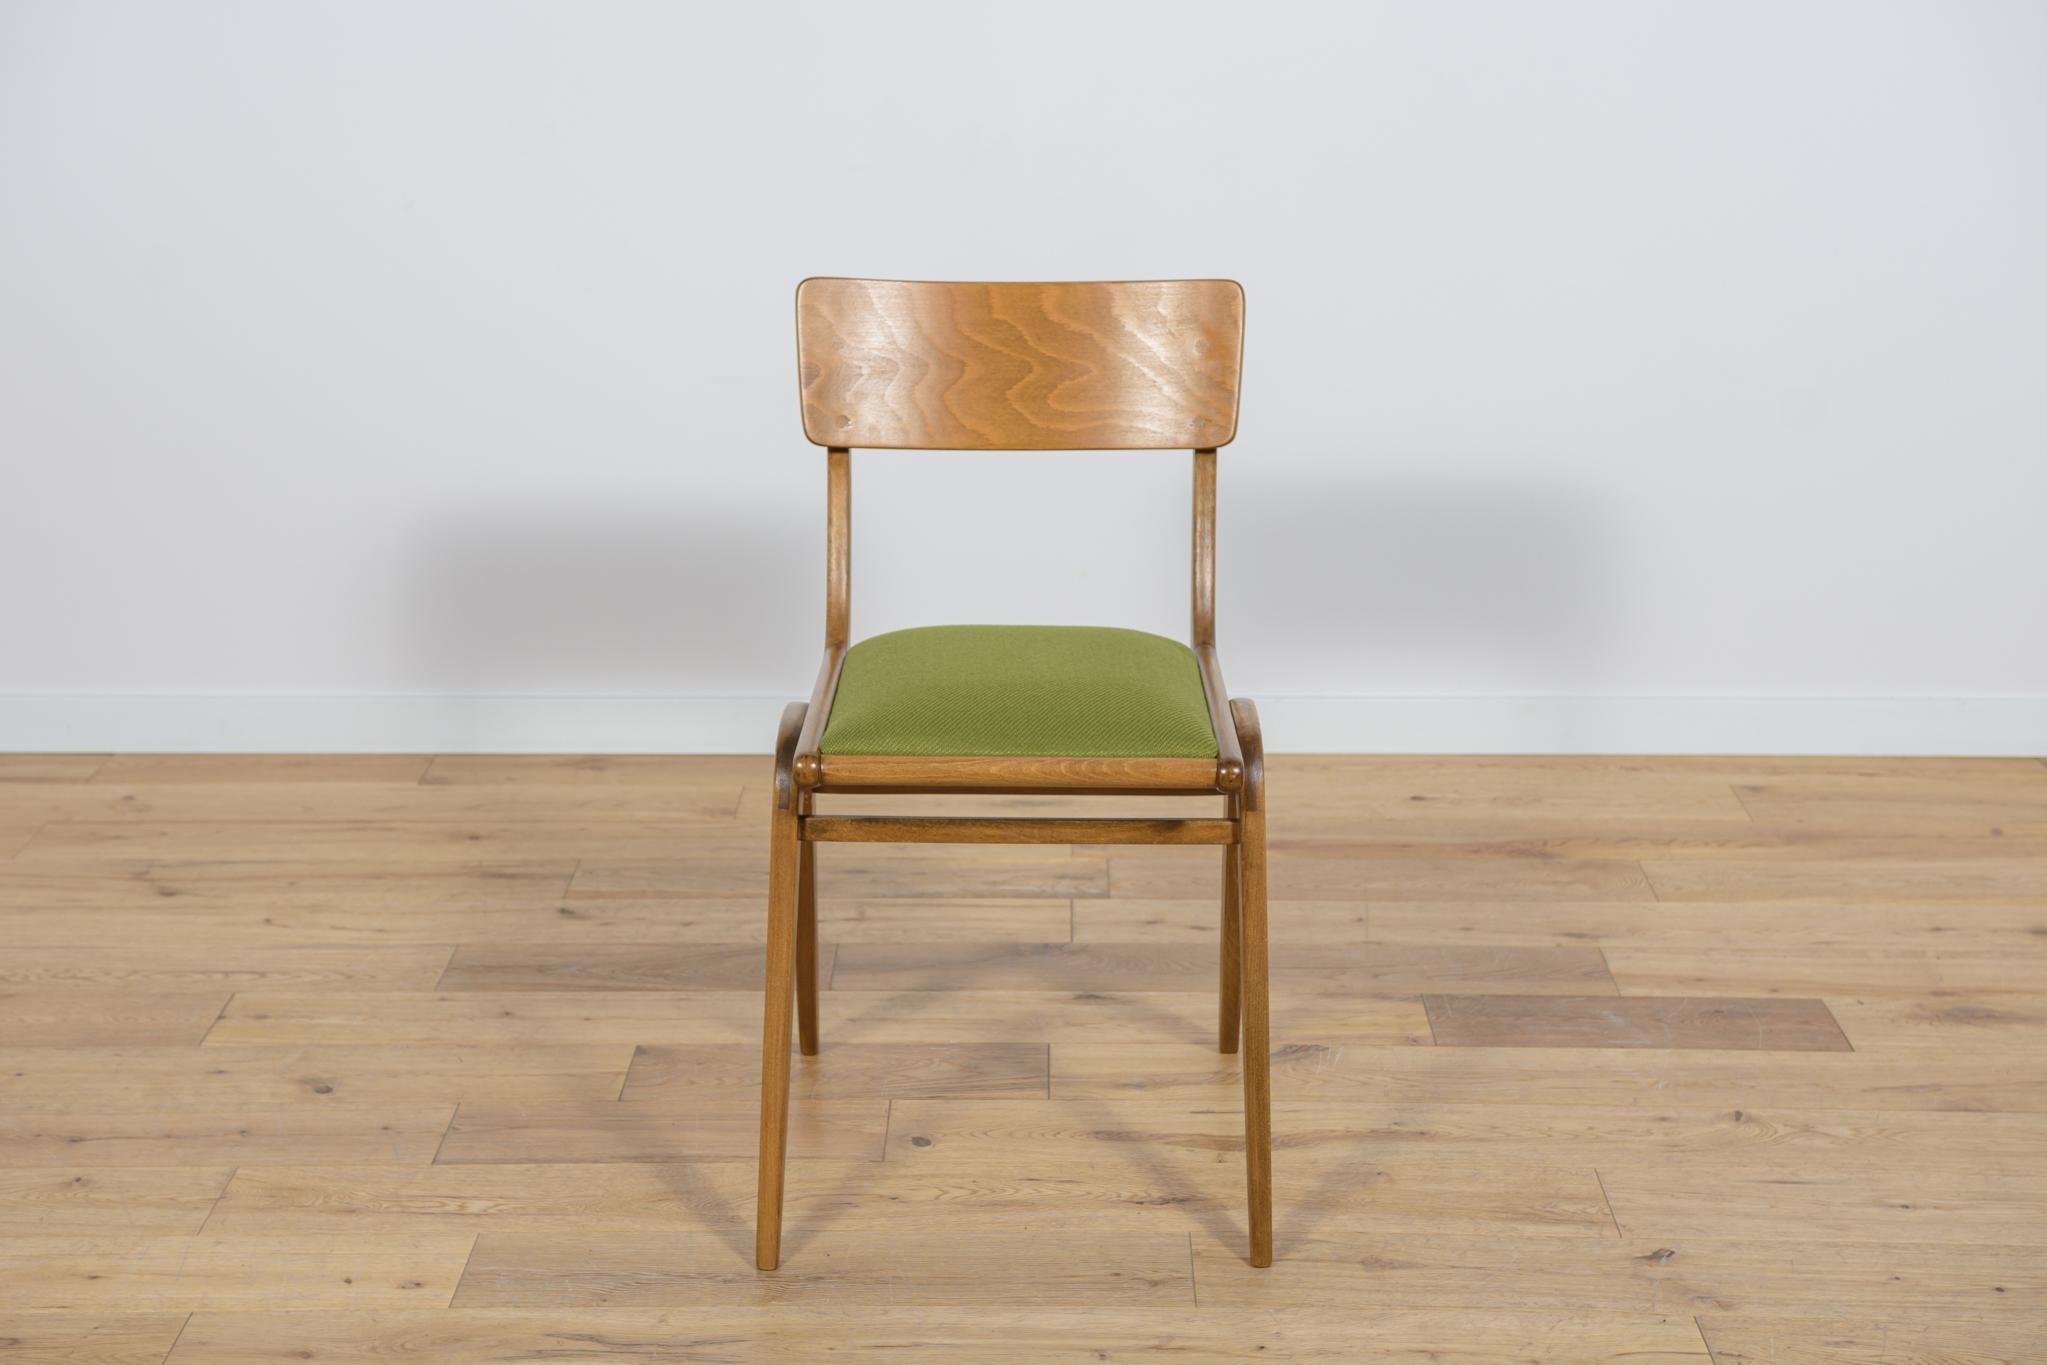 Mid-20th Century Boomerang Dining Chairs Typ 229xB from Goscinski Furniture Factory, 1960s. For Sale